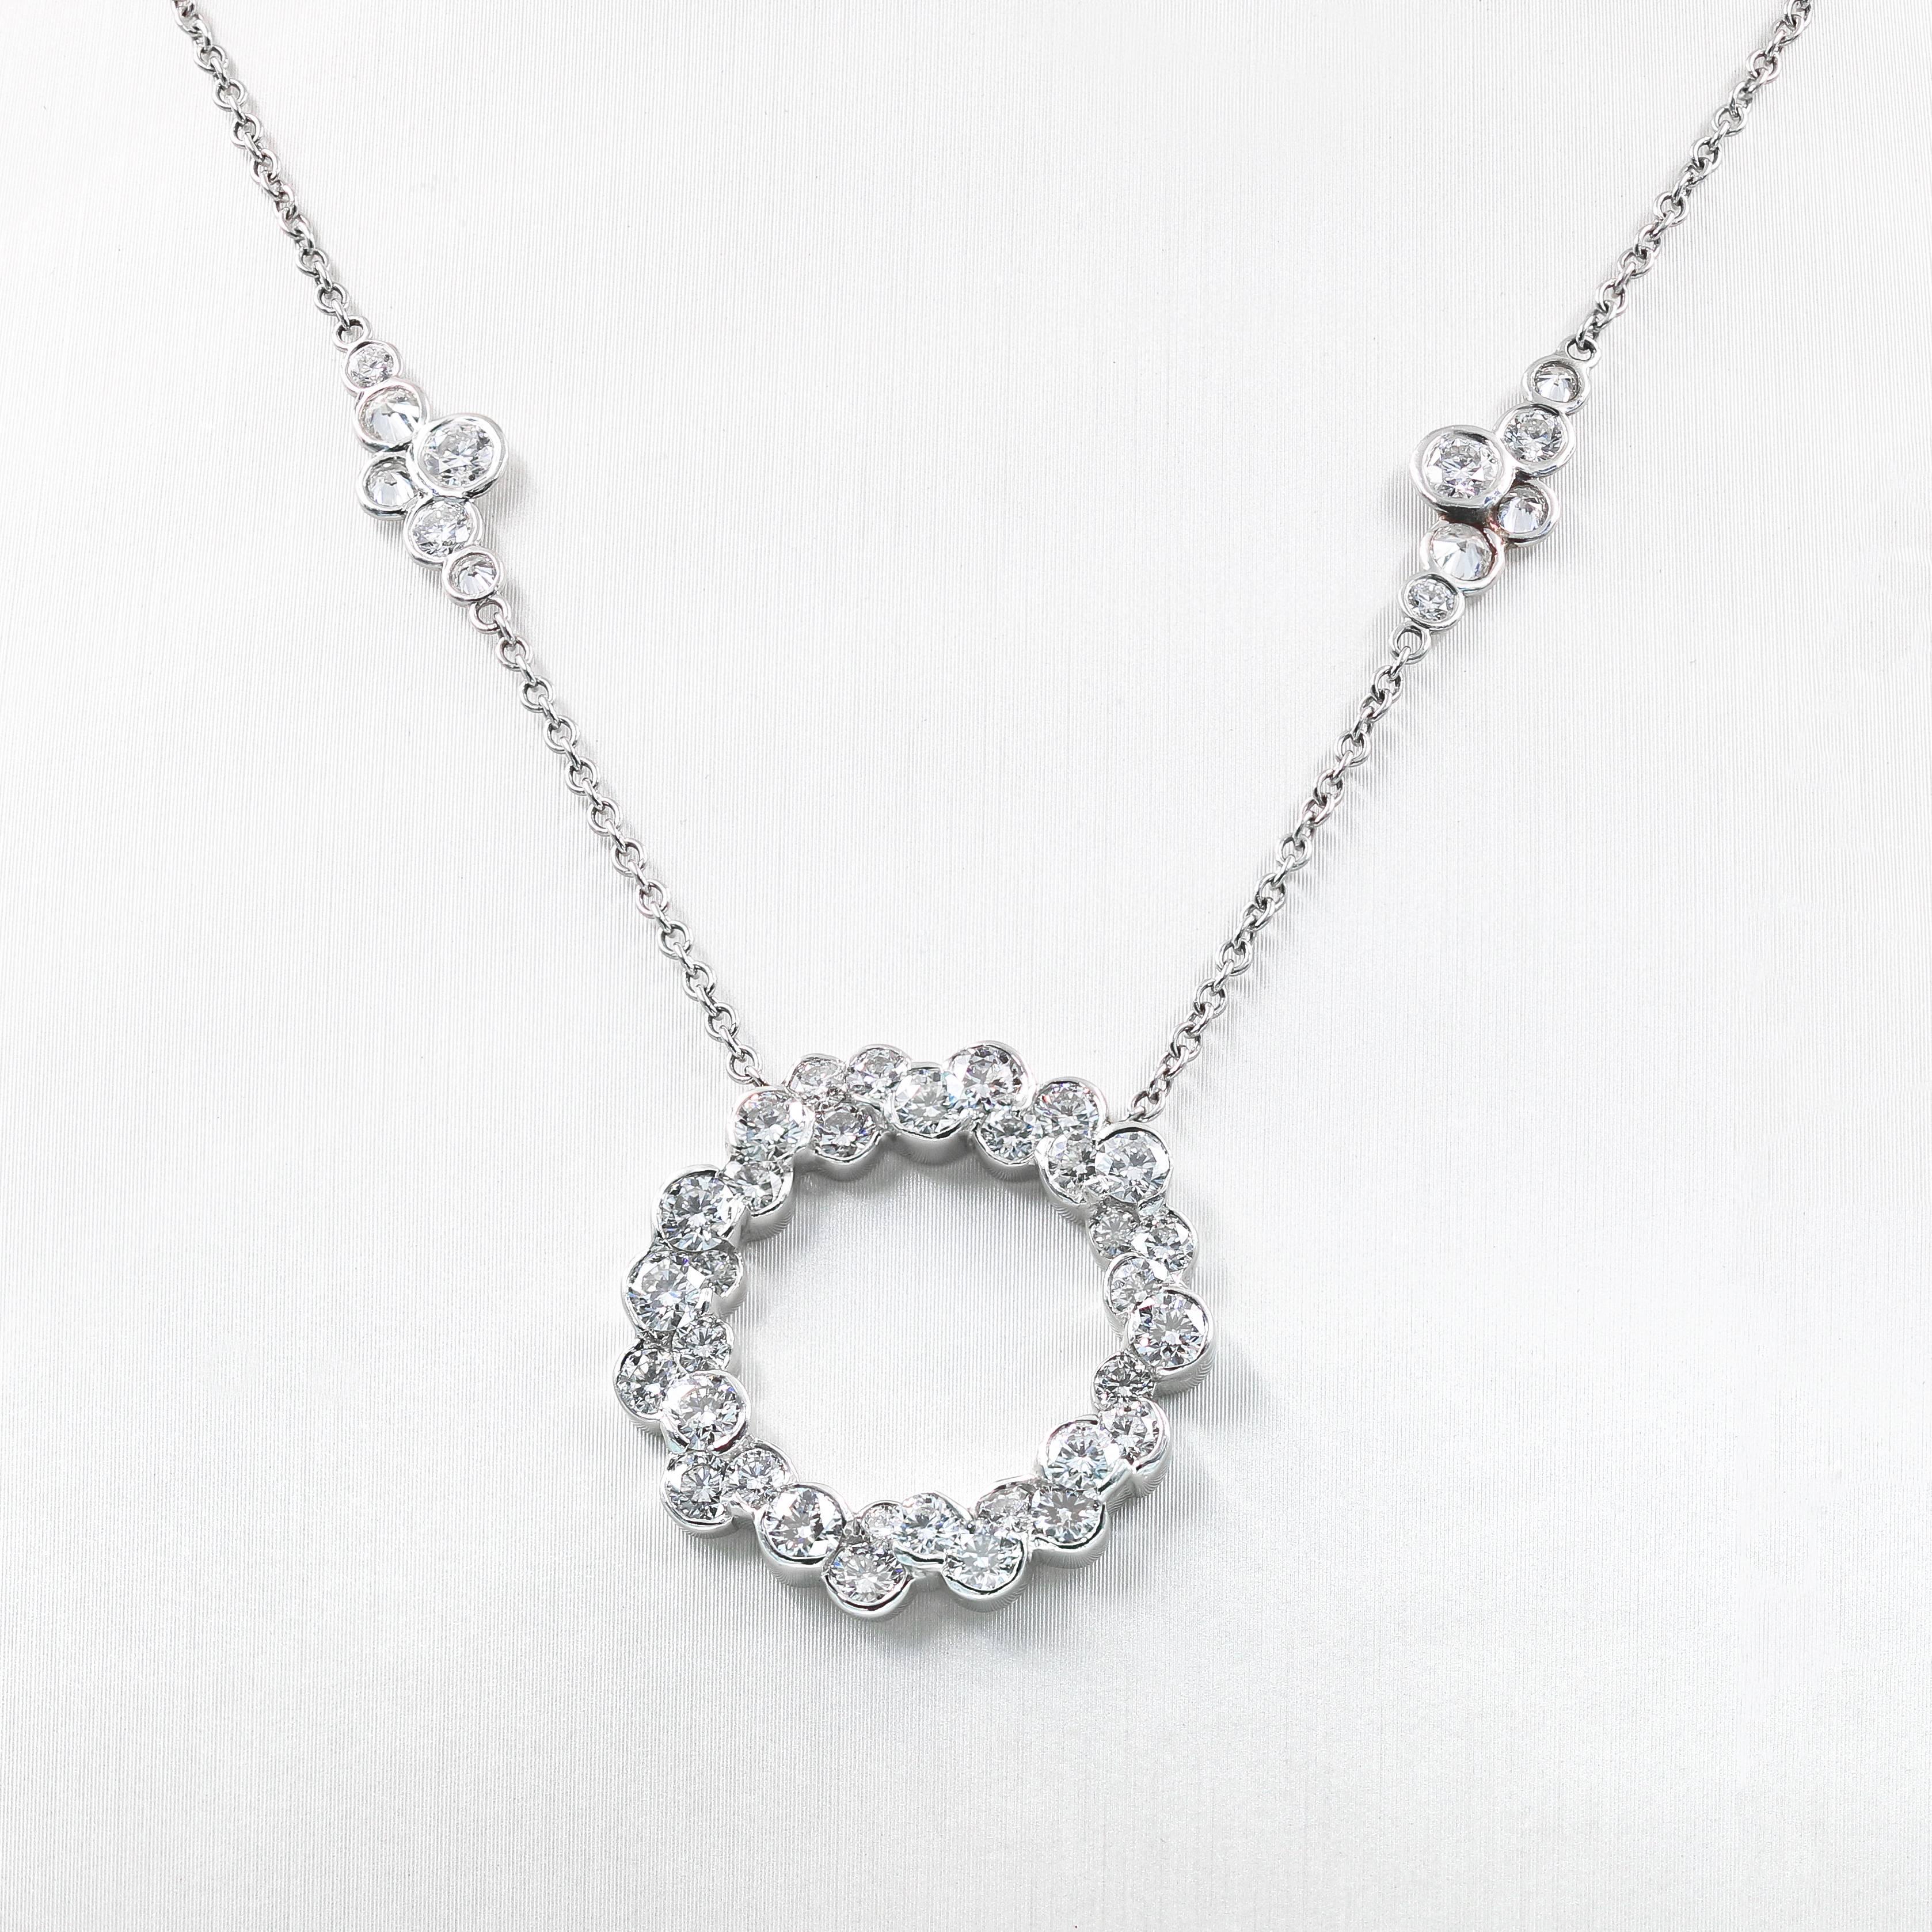 This one-of-a-kind custom crafted Lester Lampert CumuLLus® and Pirouette™ necklace is set in platinum. It has a large diamond circle, with 2 medium, and 2 large Pirouette™ sections.  The circle has 33 ideal cut round diamonds= 3.01cts. t.w.  The